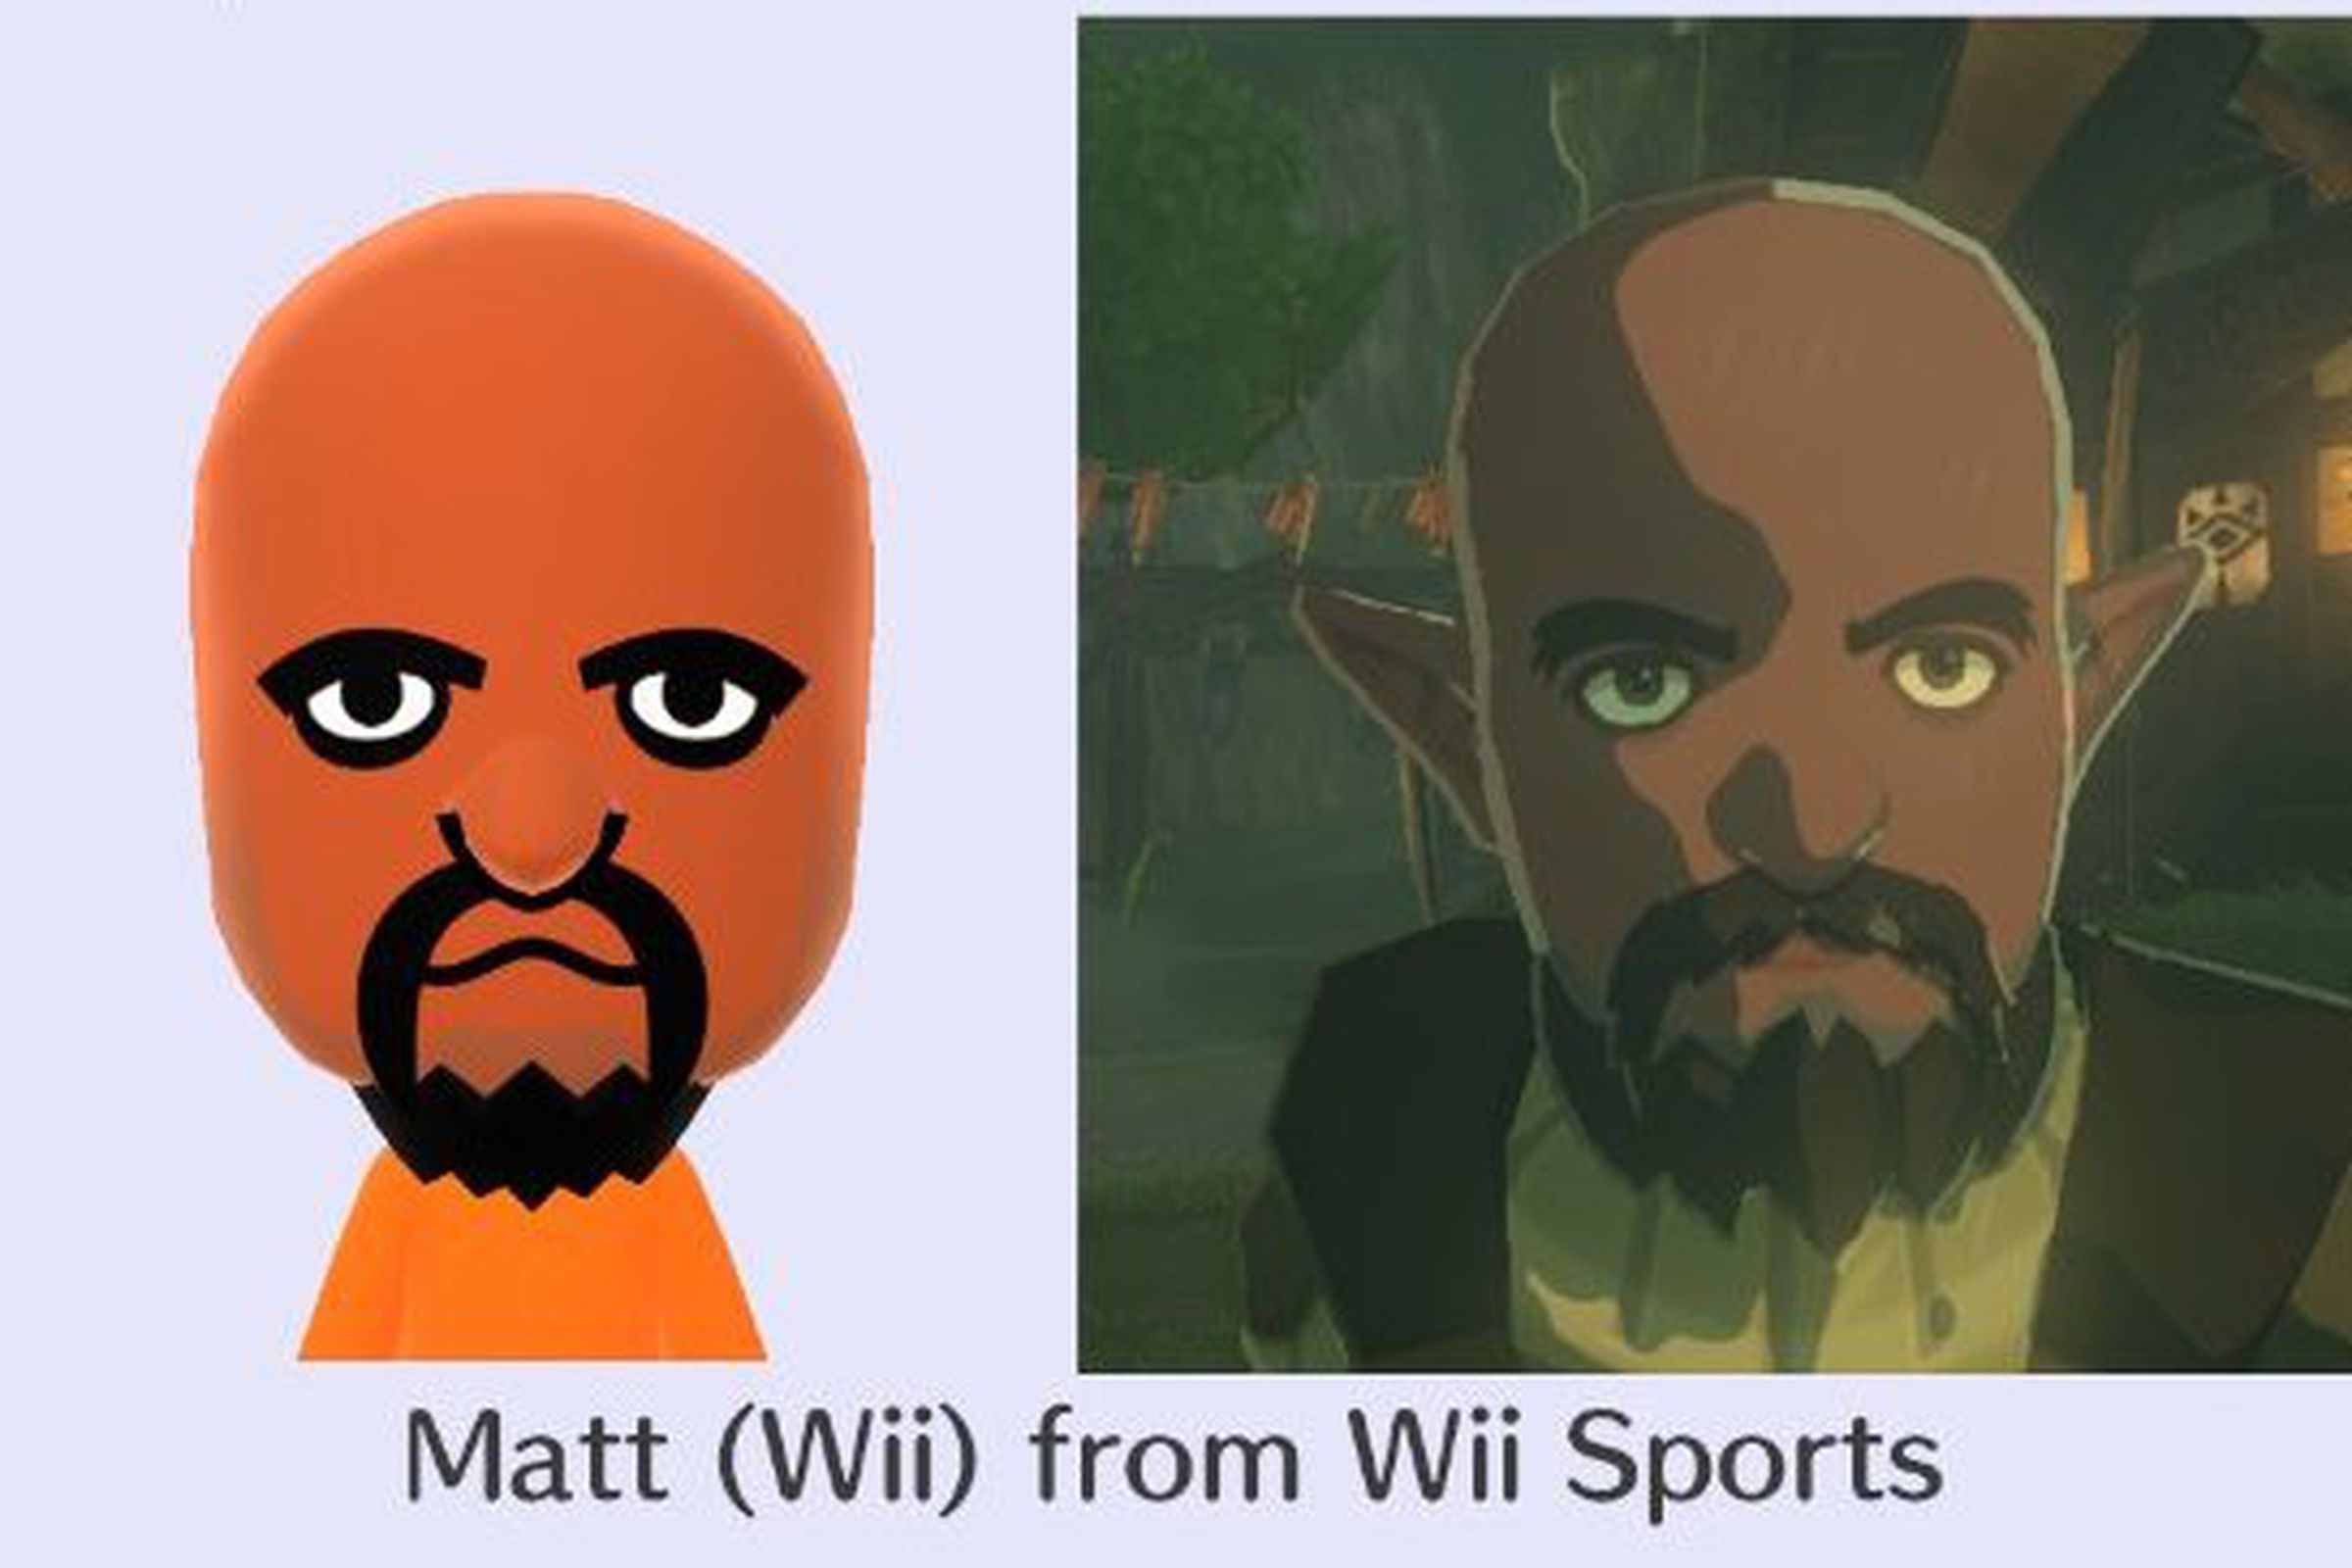 Image showing a Mii as a character in Breath of the Wild